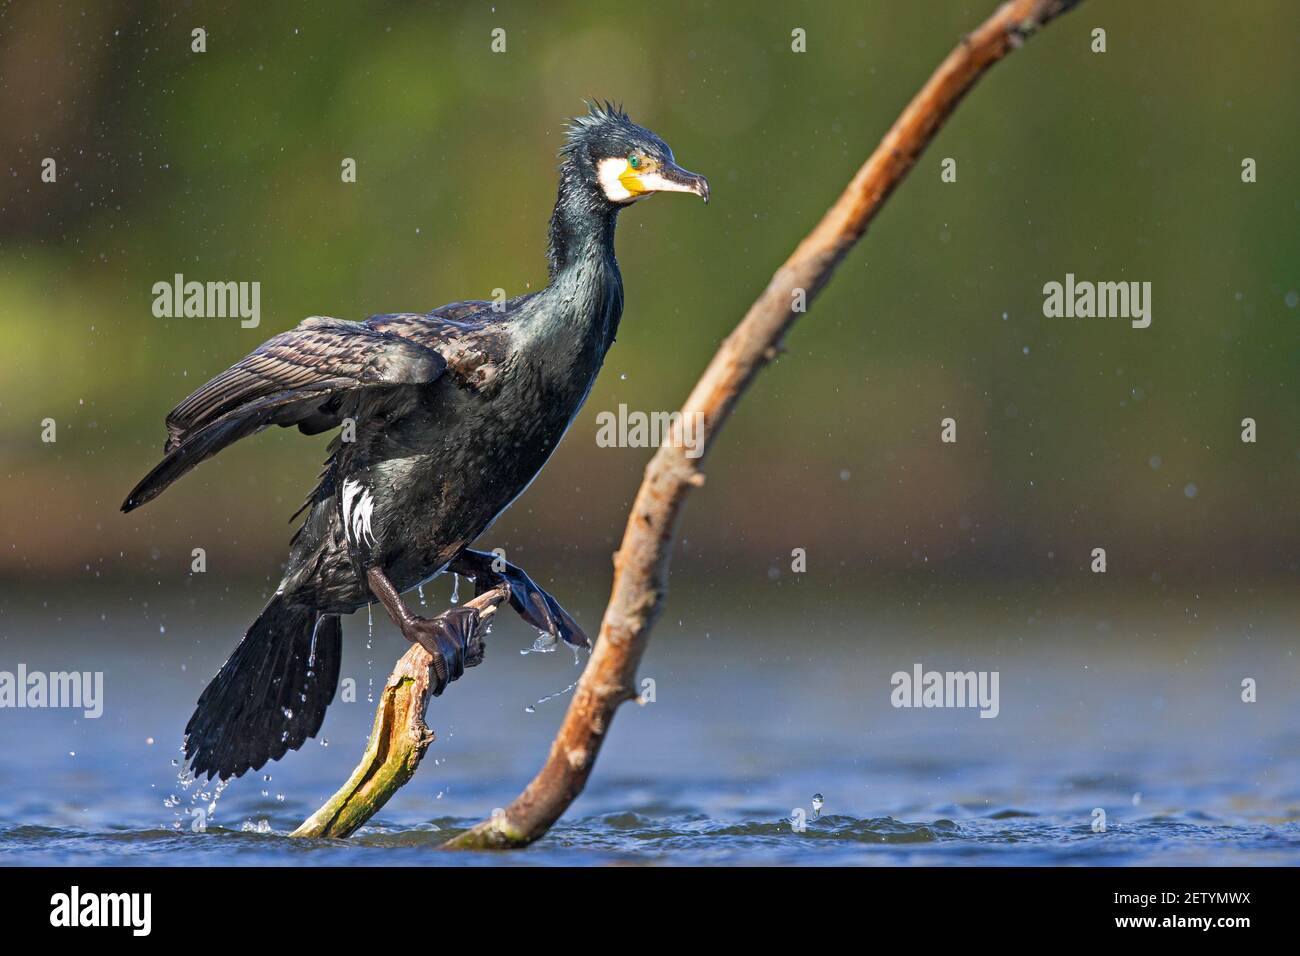 A great cormorant (Phalacrocorax carbo) drying its wings after a swim at a lake. Stock Photo